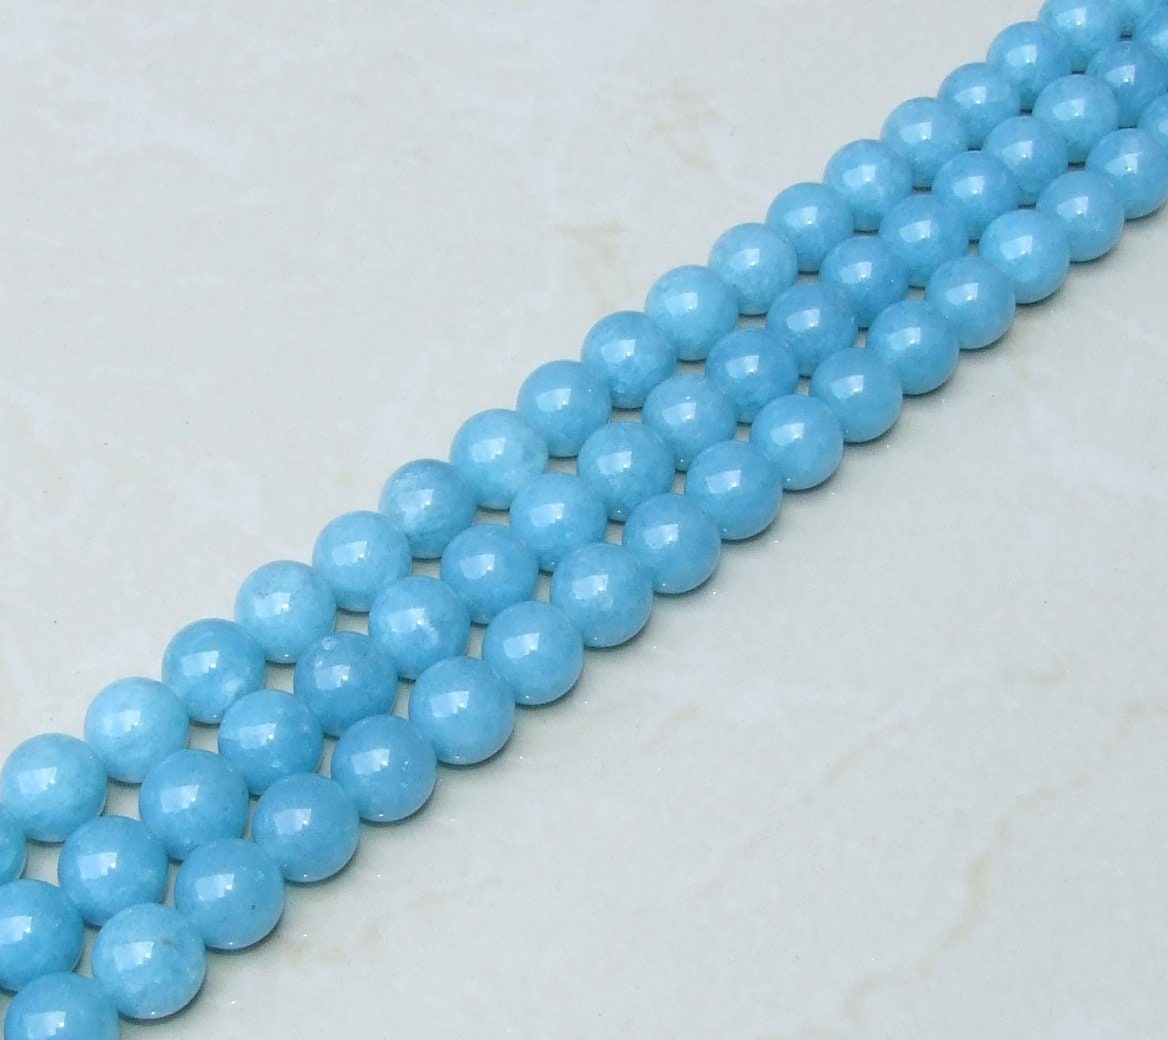 Larimar Blue Jade Faceted Beads - Gemstone Beads - 8mm and 10mm - Jade Beads - Jewelry Beads - 15 inch Strand